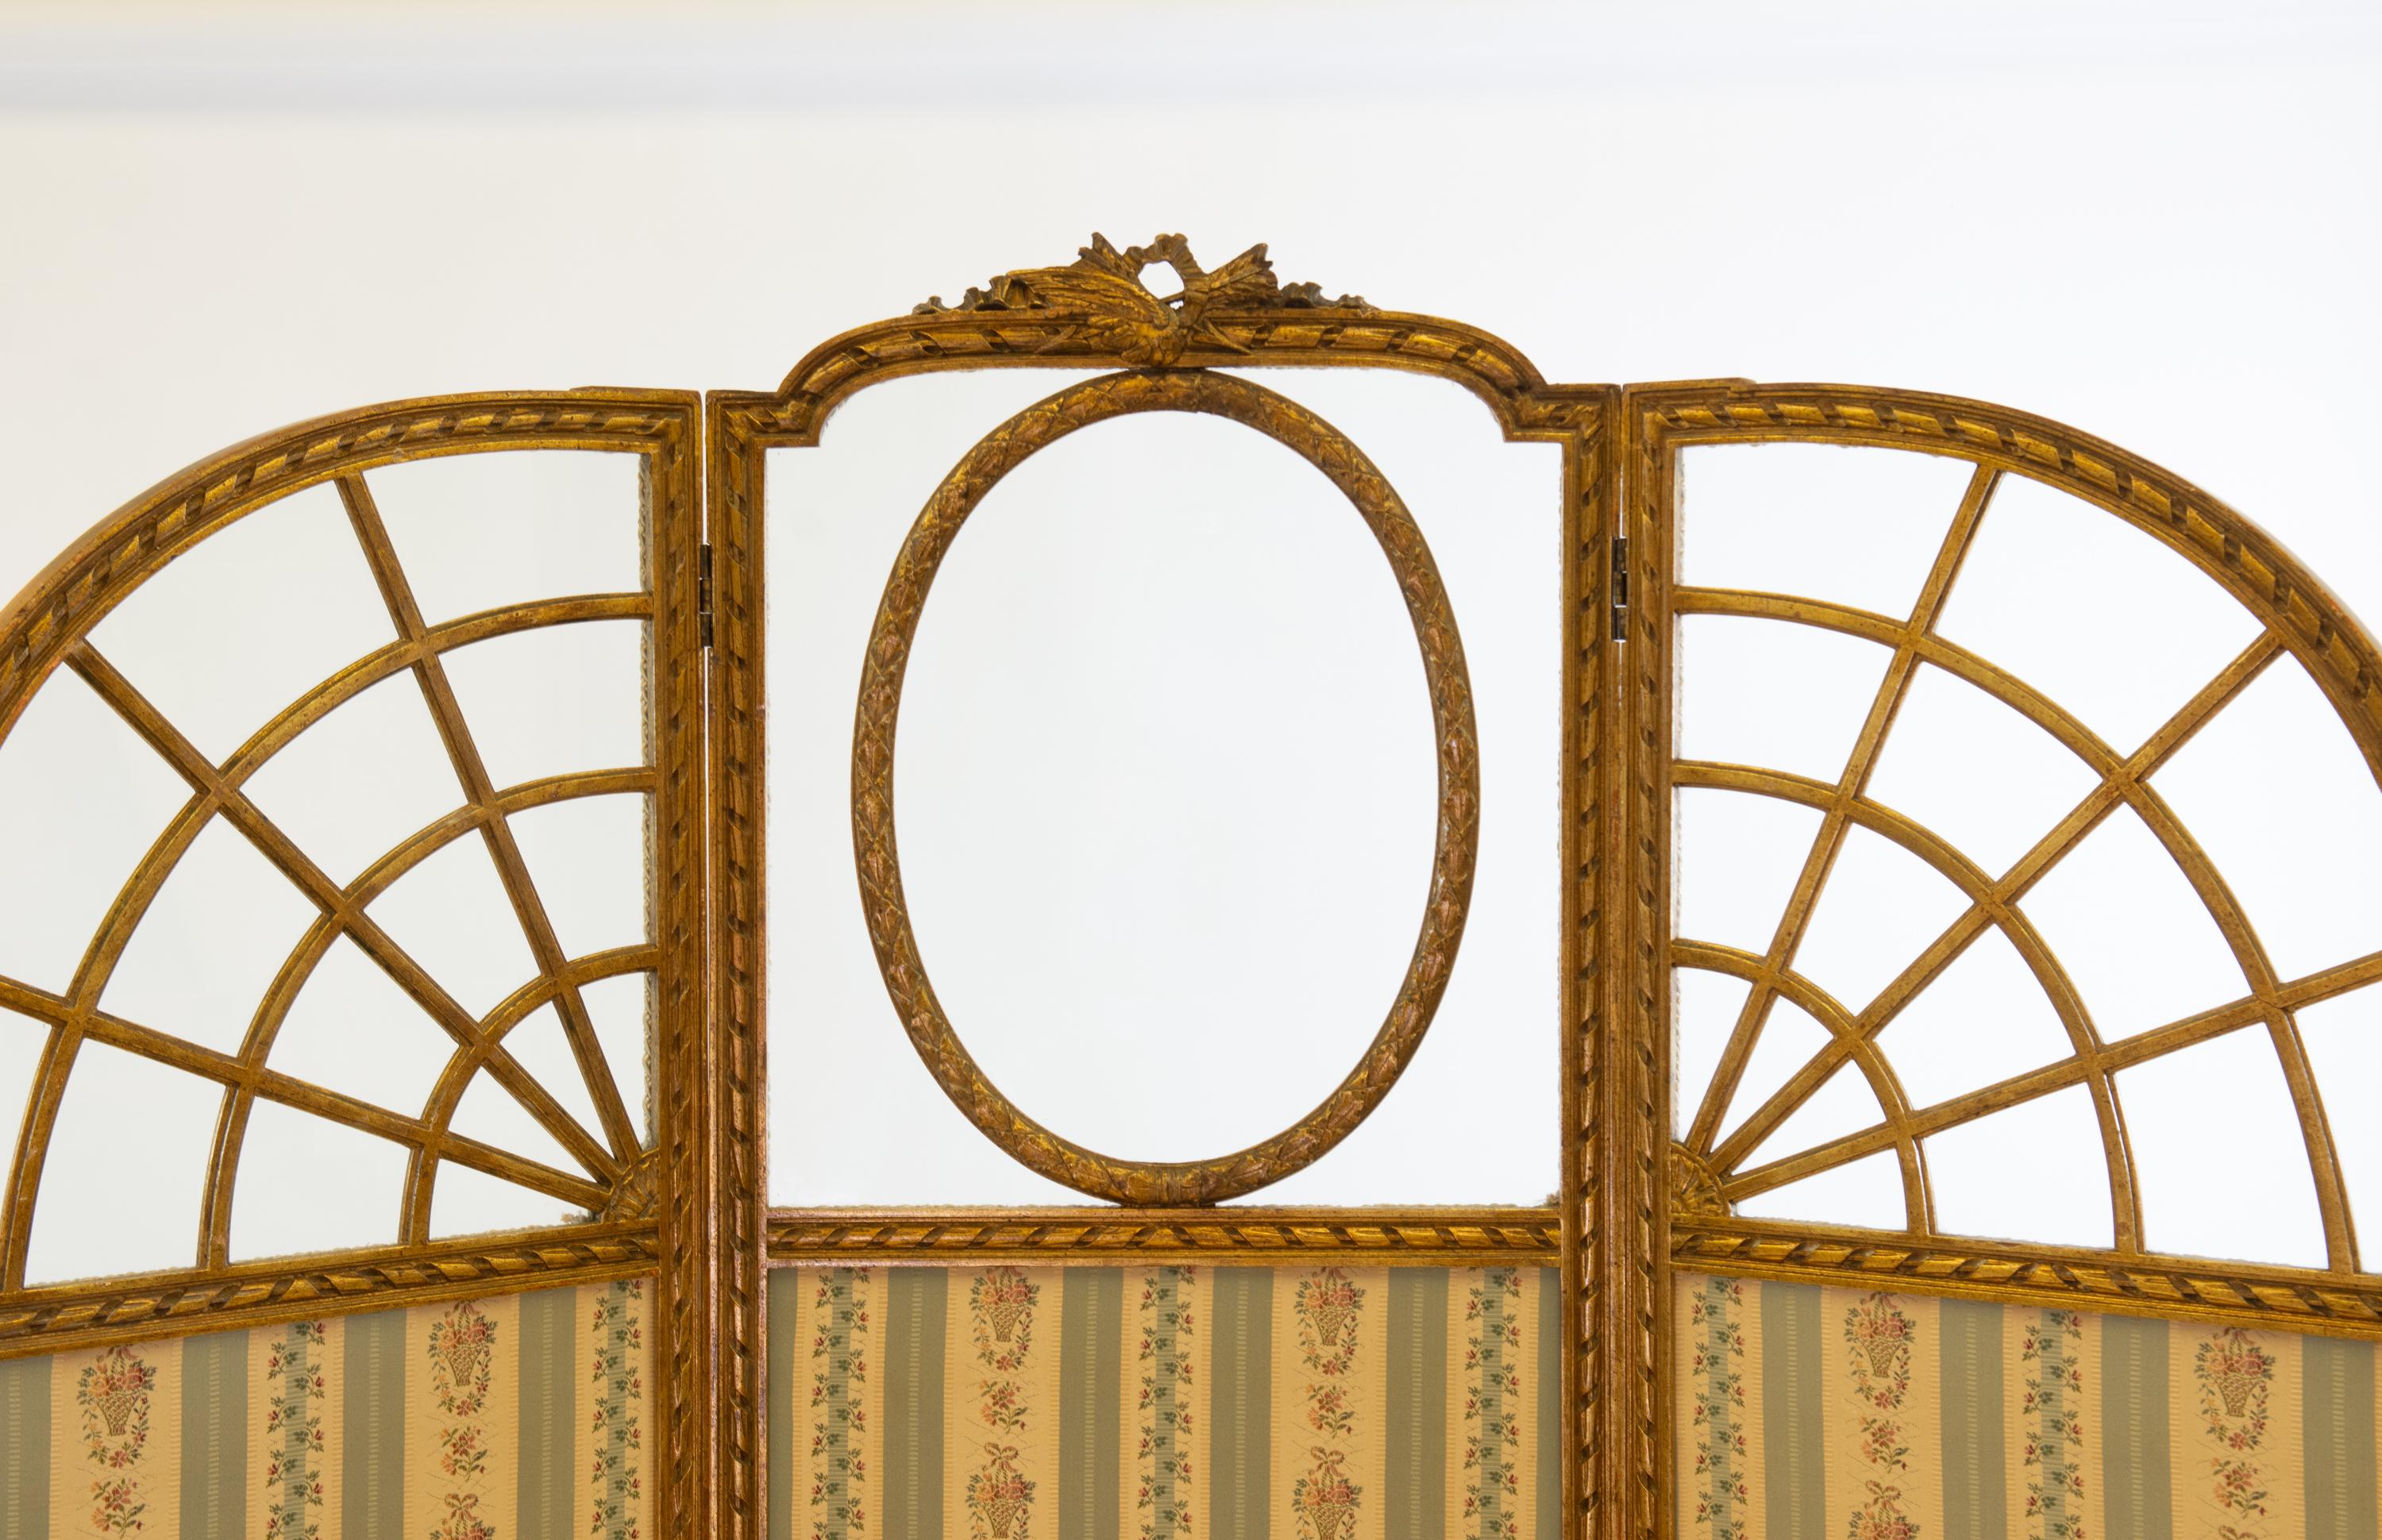 Neoclassical Revival Antique English Edwardian Gilt Wood Folding Screen Room Divider For Sale